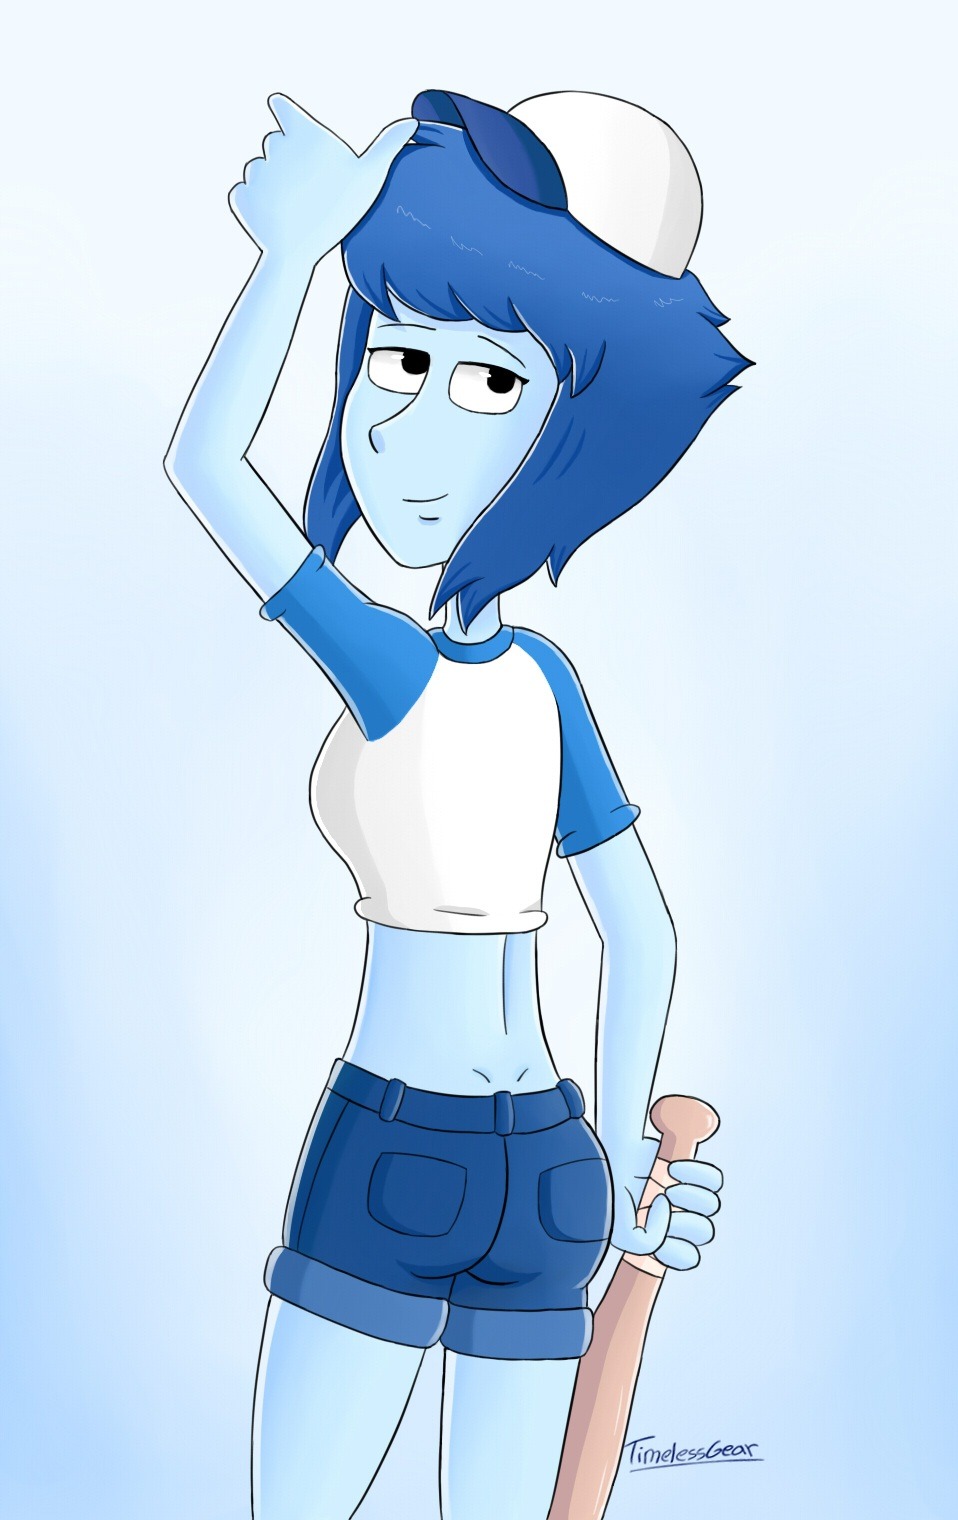 Lapis in baseball outfit was one of my favorite things in Hit The Diamond, I’ll try do more Lapis soon.